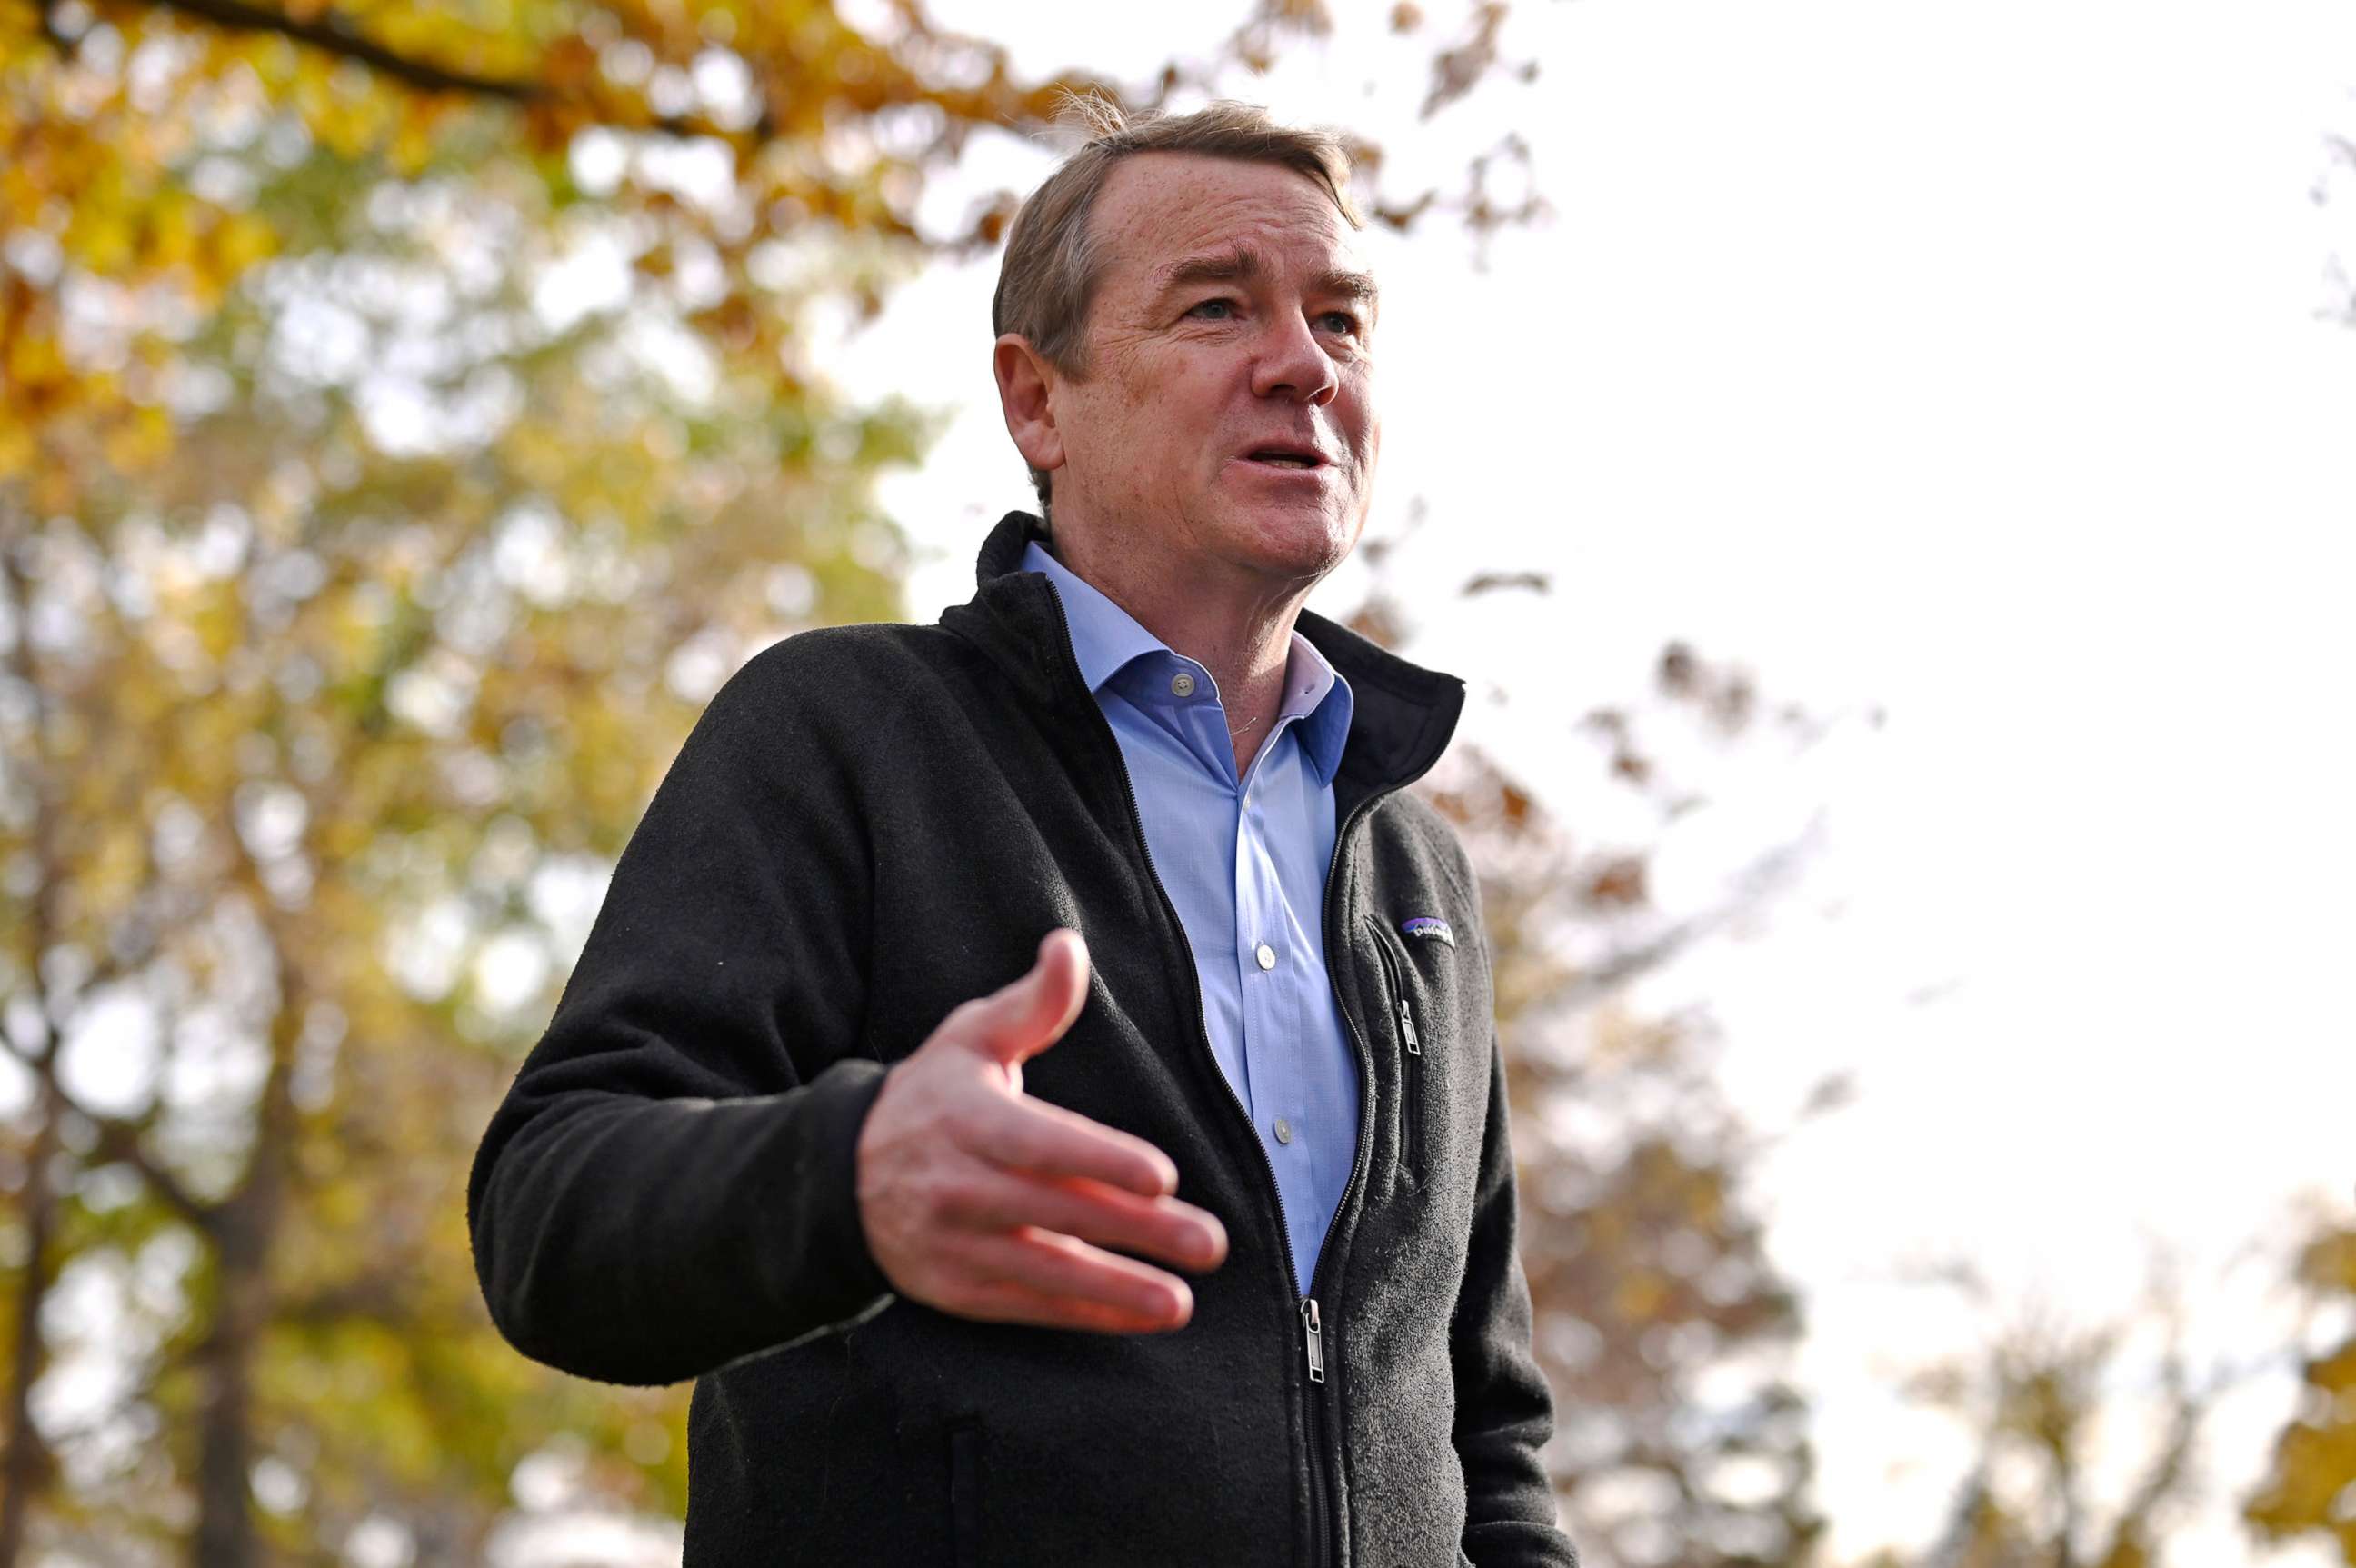 PHOTO: Sen. Michael Bennet answers questions from reporters after dropping off his ballot at Washington Park in Denver, Nov. 2, 2022.